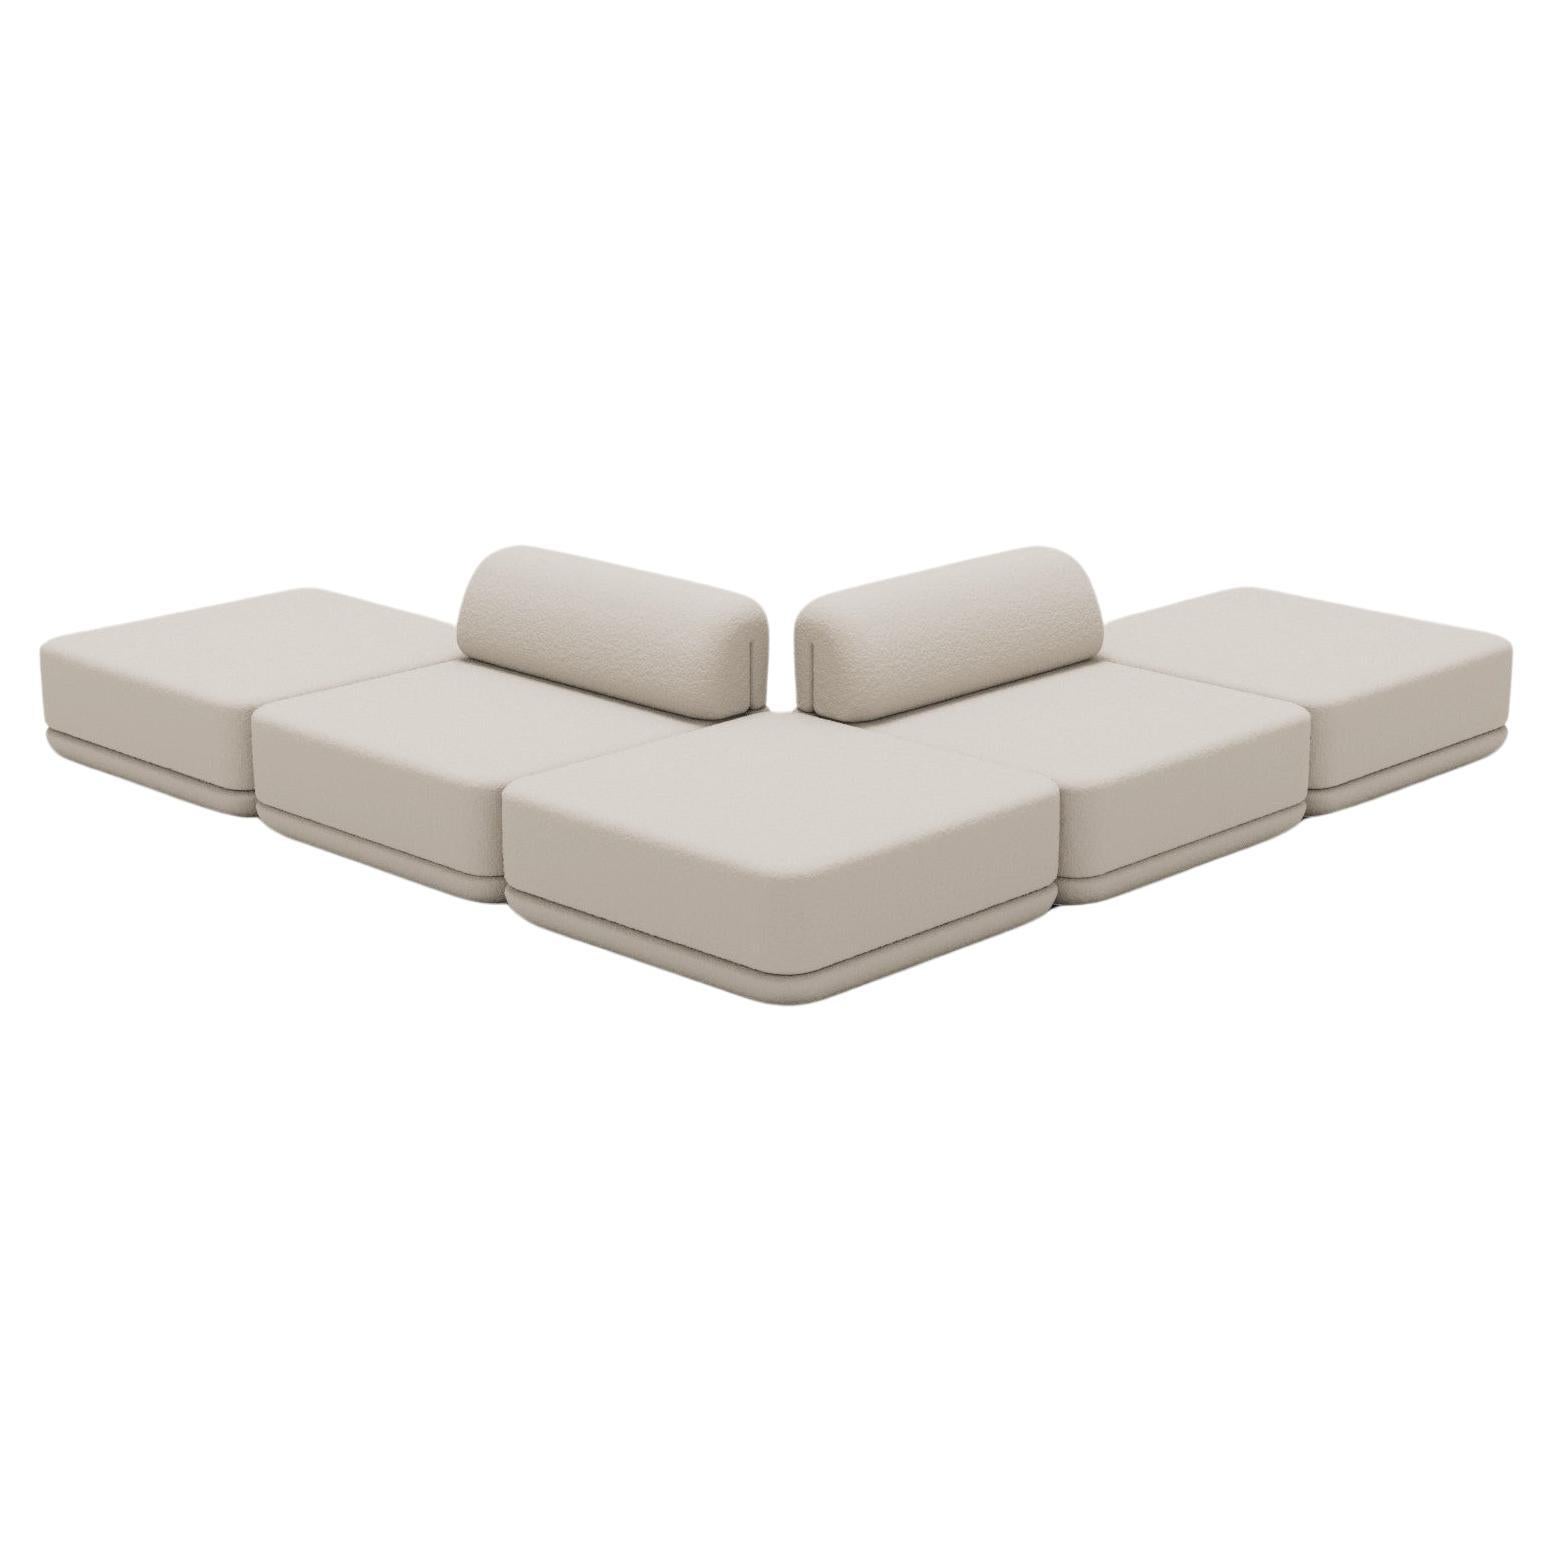 The Cube Sofa - Ottoman Mix Sectional For Sale